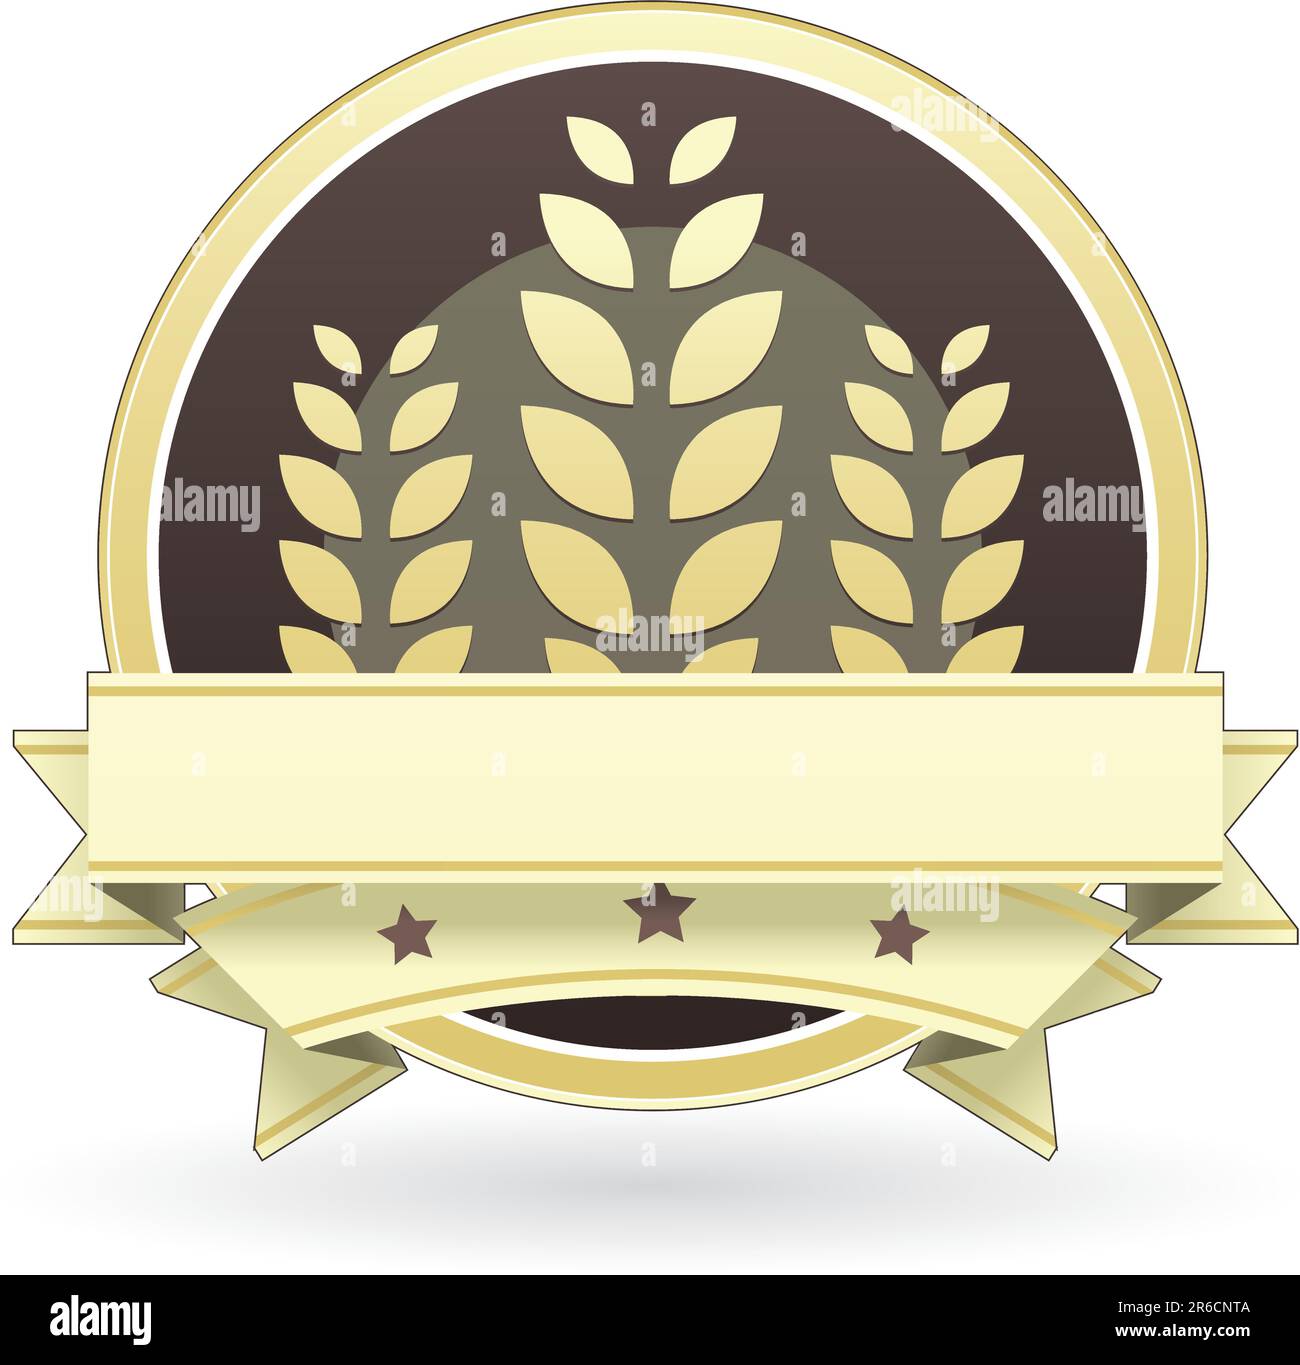 Blank vector food label for organic or whole grain cereal products. Stylized background with wheat and a blank banner space so that a designer can ... Stock Vector